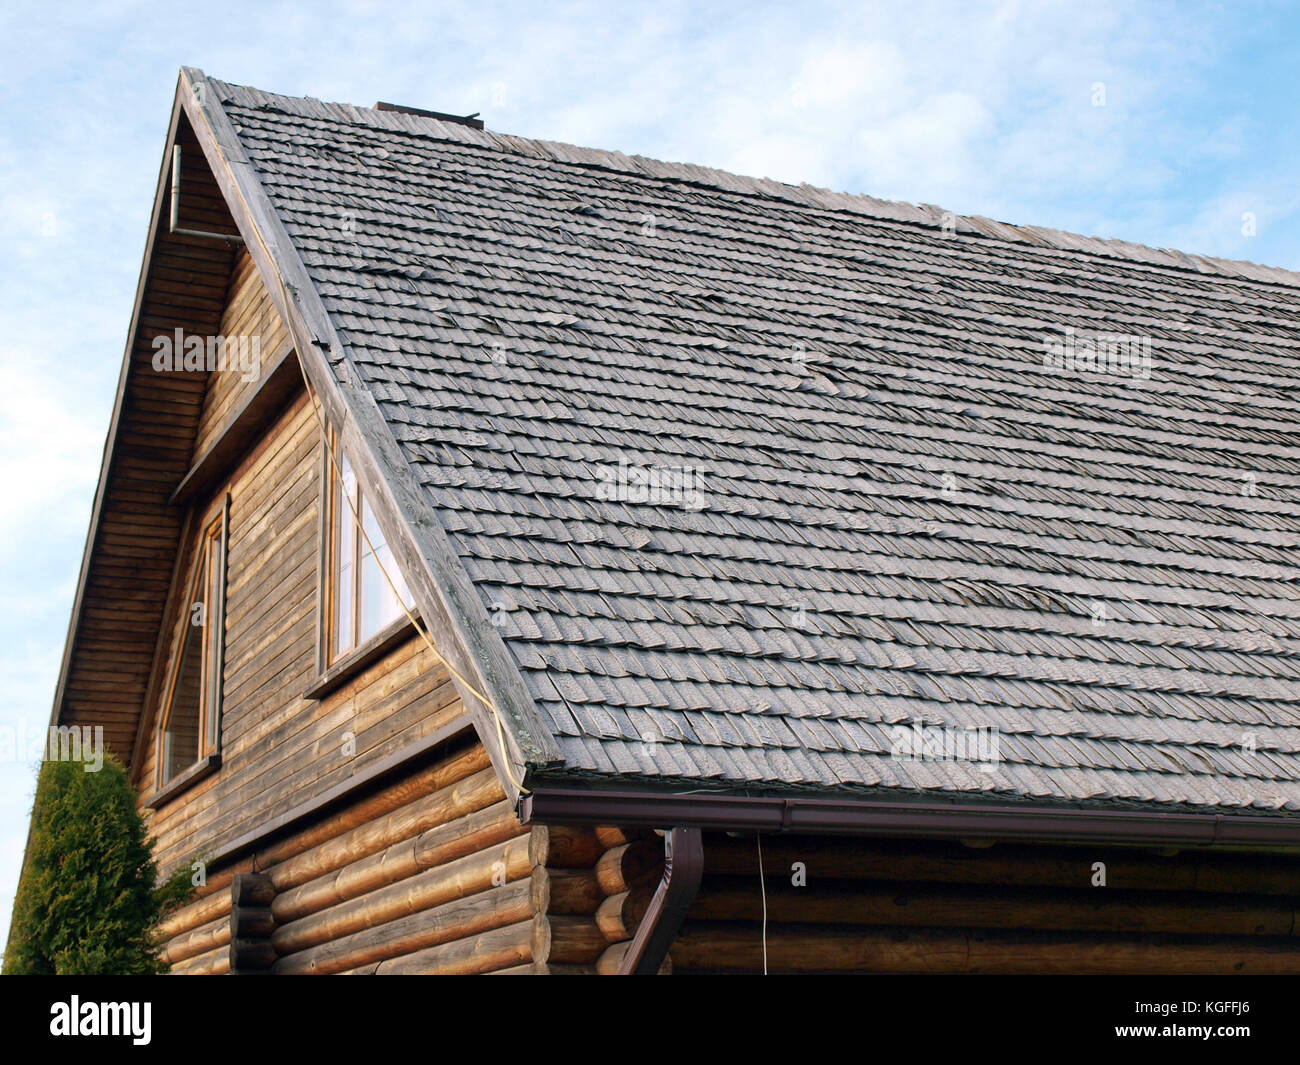 Part of house with weathered wood shingle roof Stock Photo